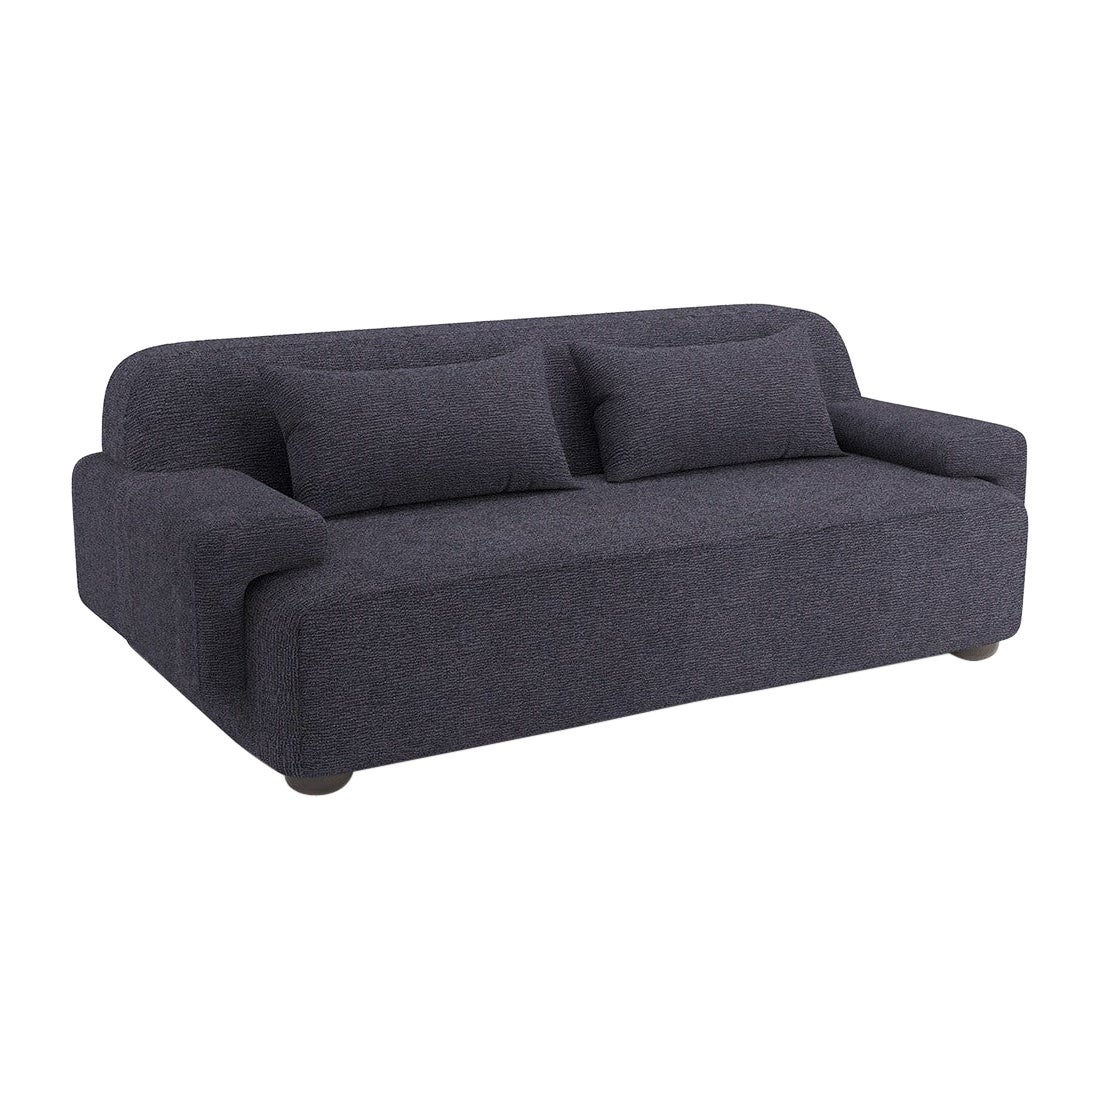 Popus Editions Lena 2.5 Seater Sofa in Anthracite Megeve Fabric with Knit Effect